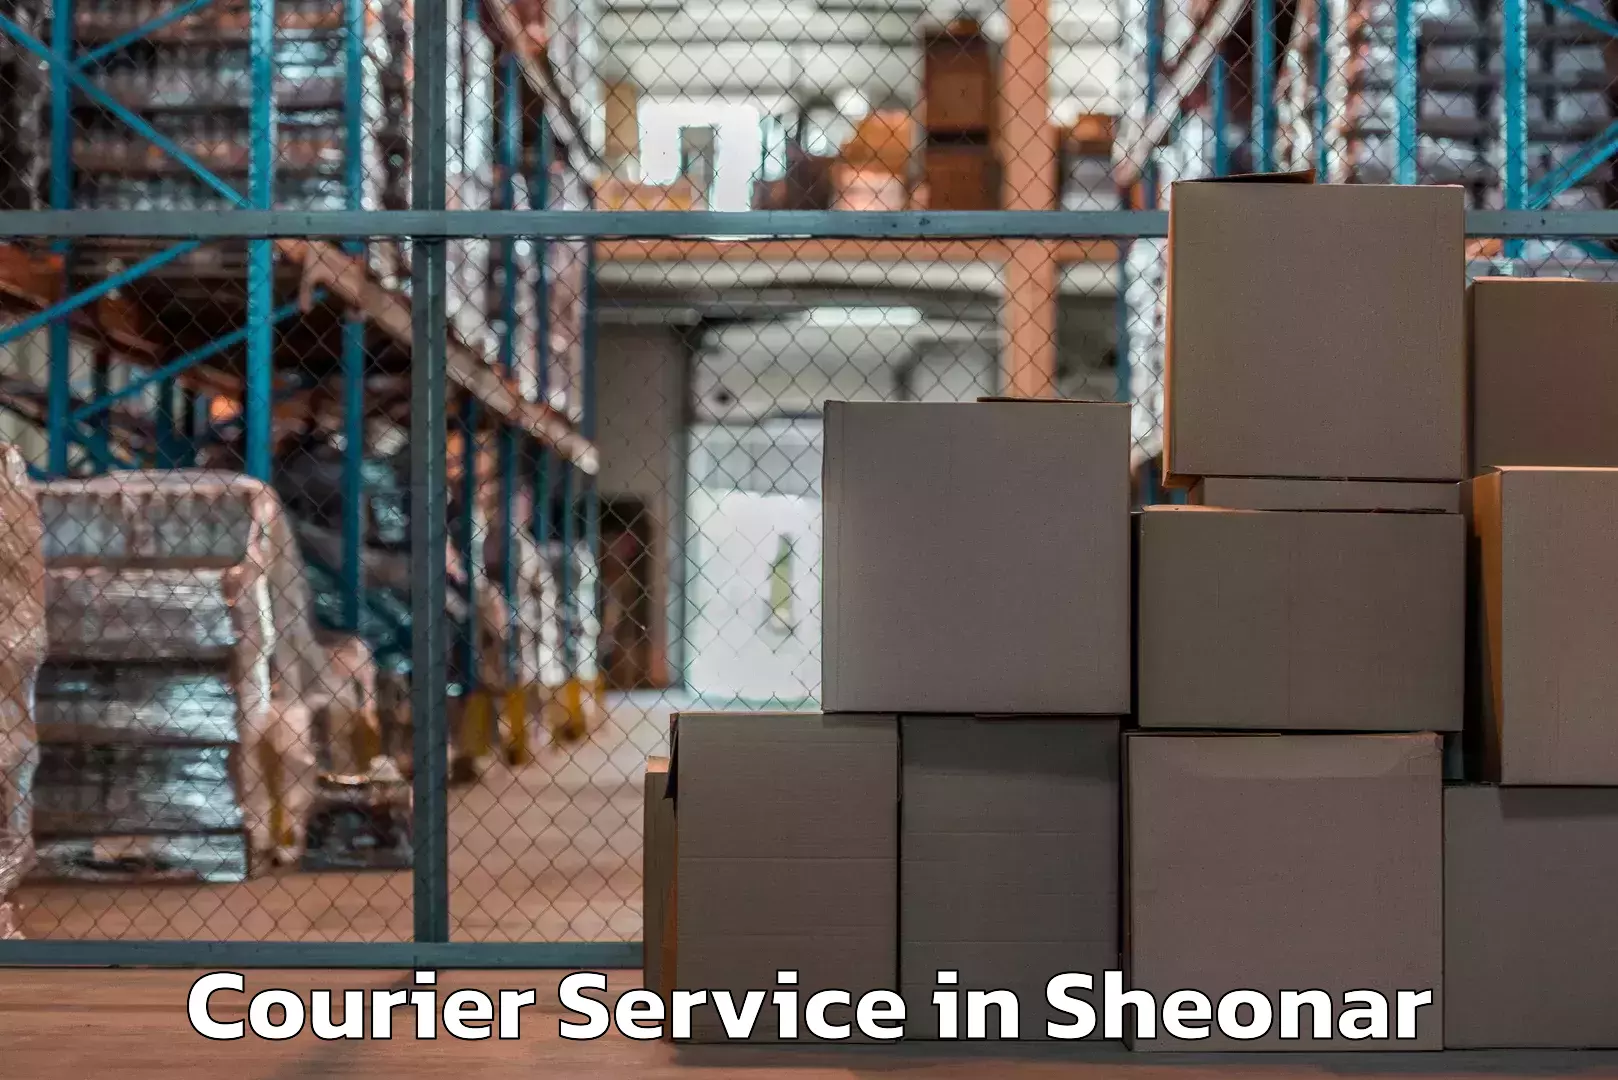 Personalized courier experiences in Sheonar